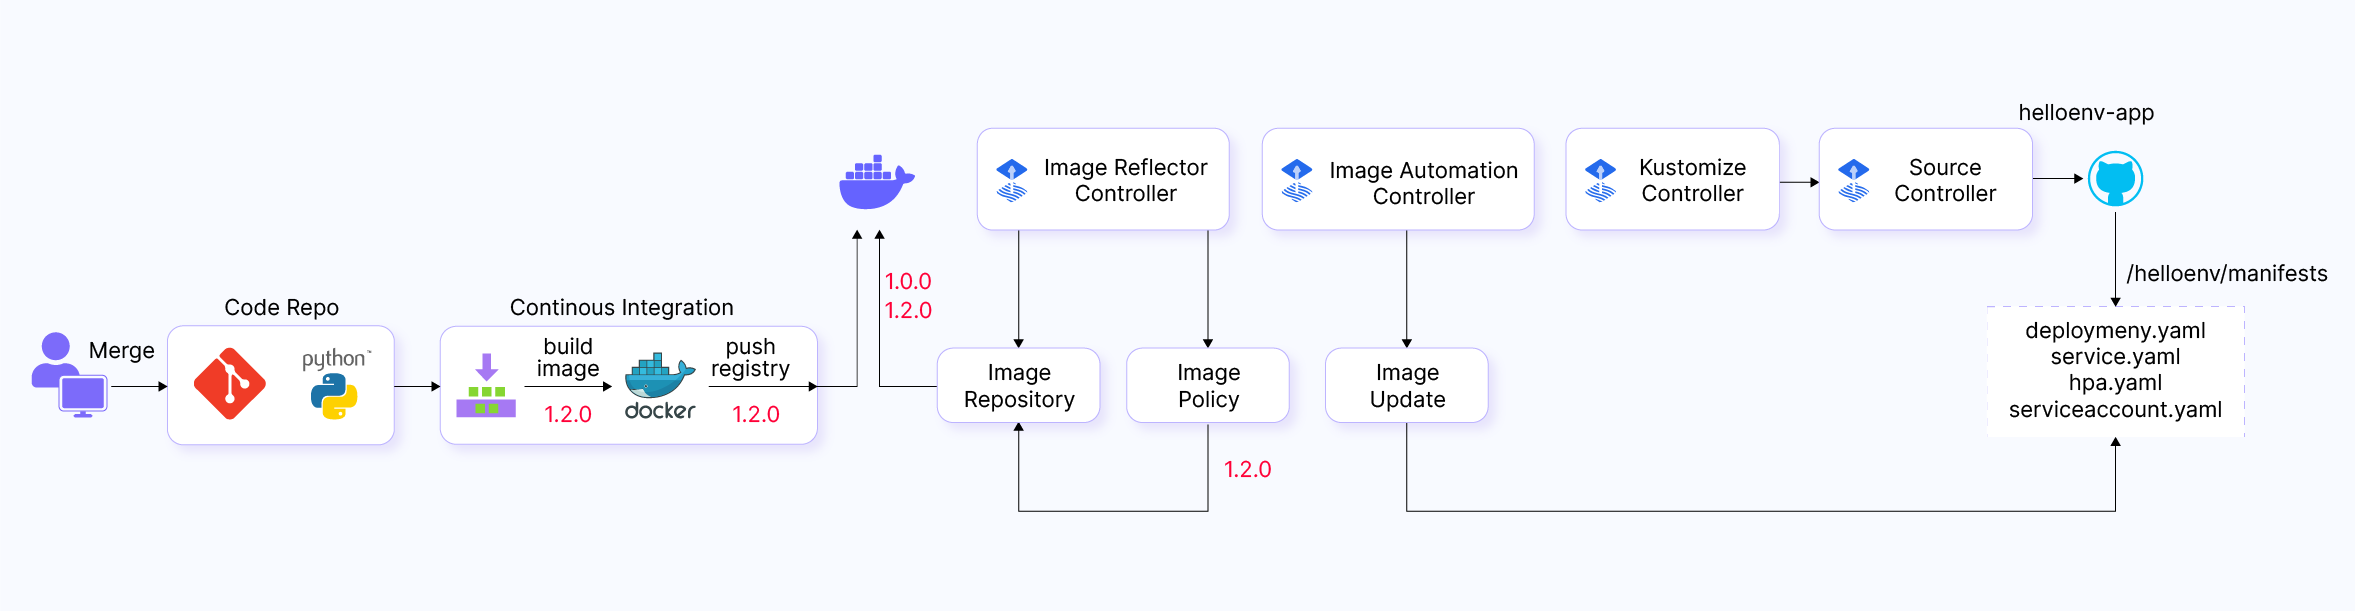 Image update process using Image Automation and Image Reflector Controller